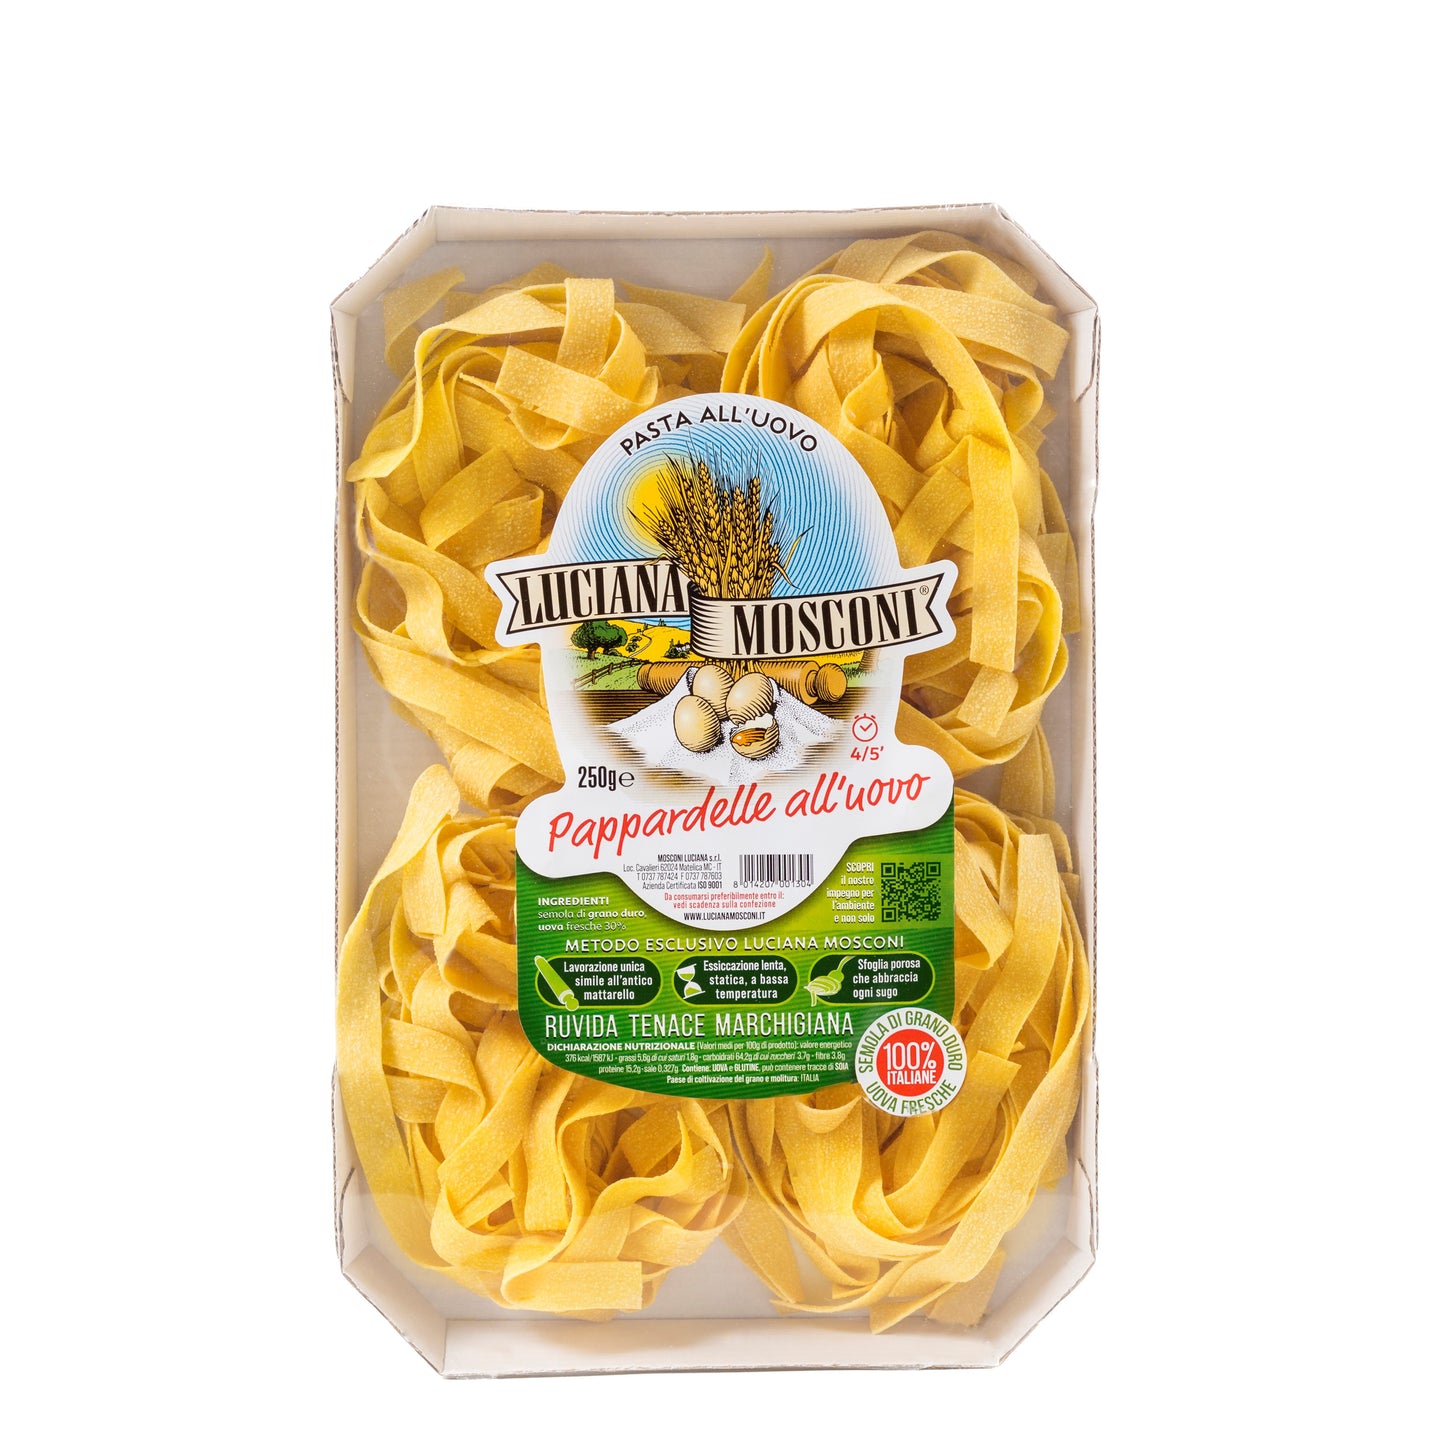 NEW! Pappardelle Nest, Egg Pasta by Luciana Mosconi: 8.8 oz, 12/CS